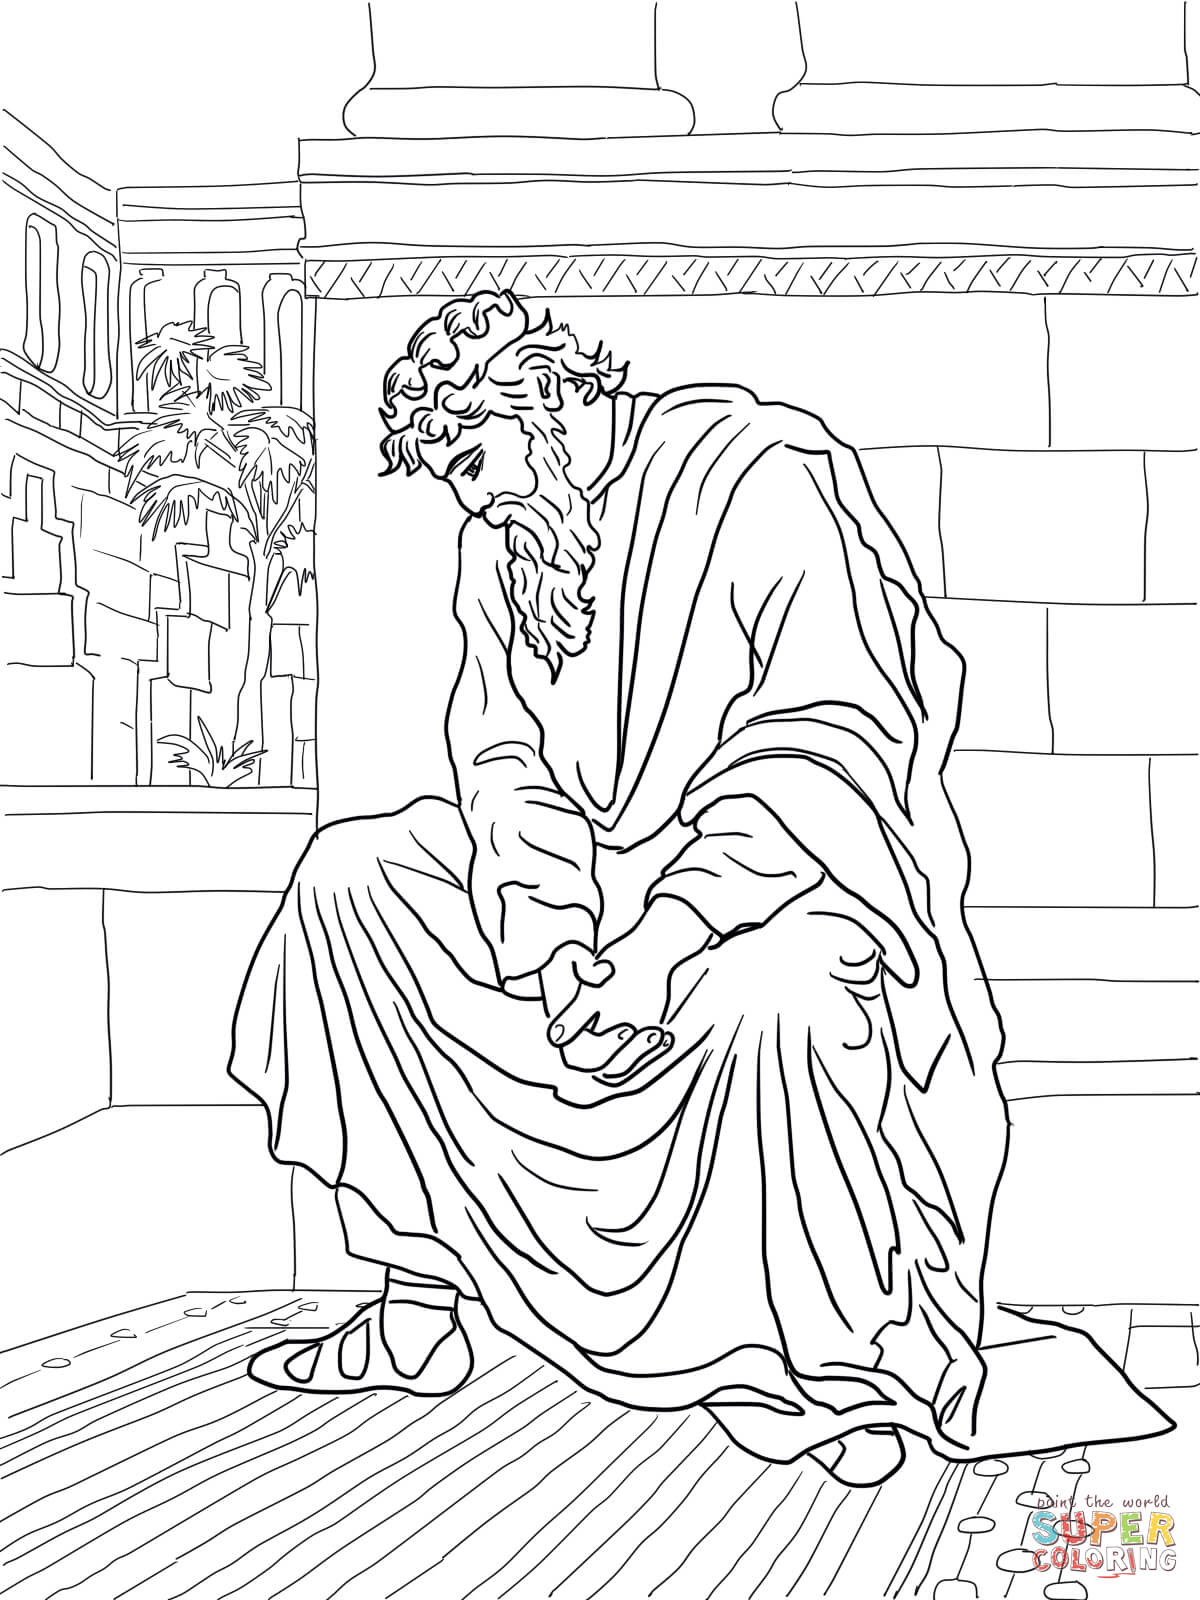 David Weeping Over the Death of Absalom coloring page | Free ...